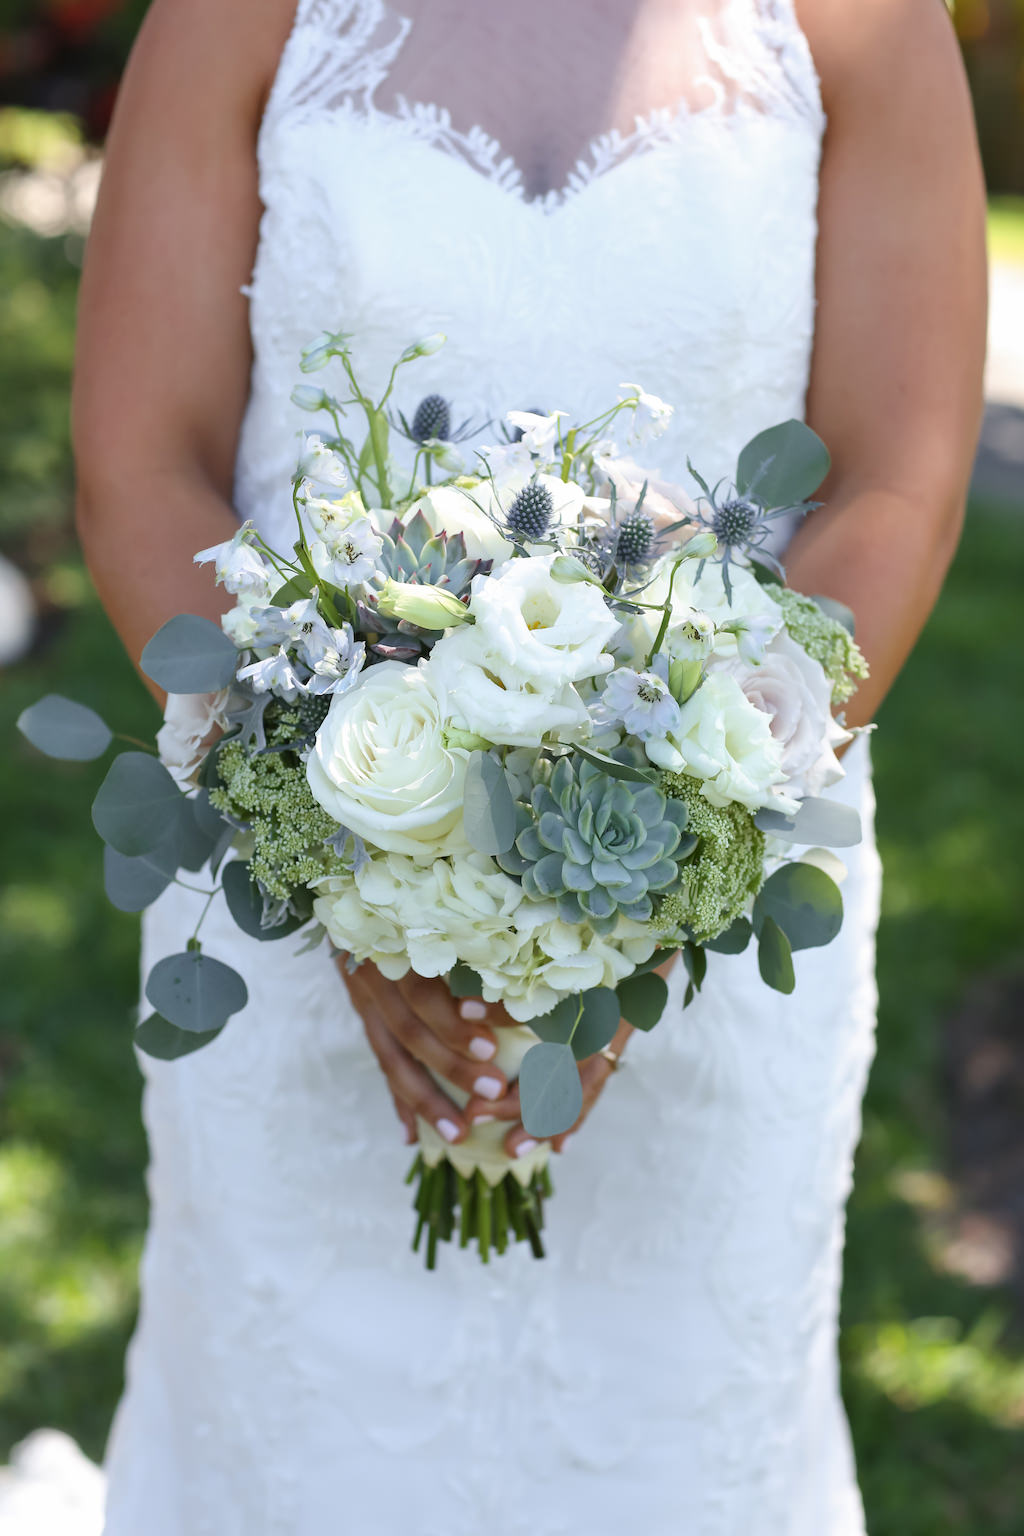 Outdoor Bridal Portrait wearing Lace Neckline Column Wedding Dress with White and Greenery Bouquet with Thistle and Succulents | Tampa Bay Wedding Photographer Lifelong Photography Studios